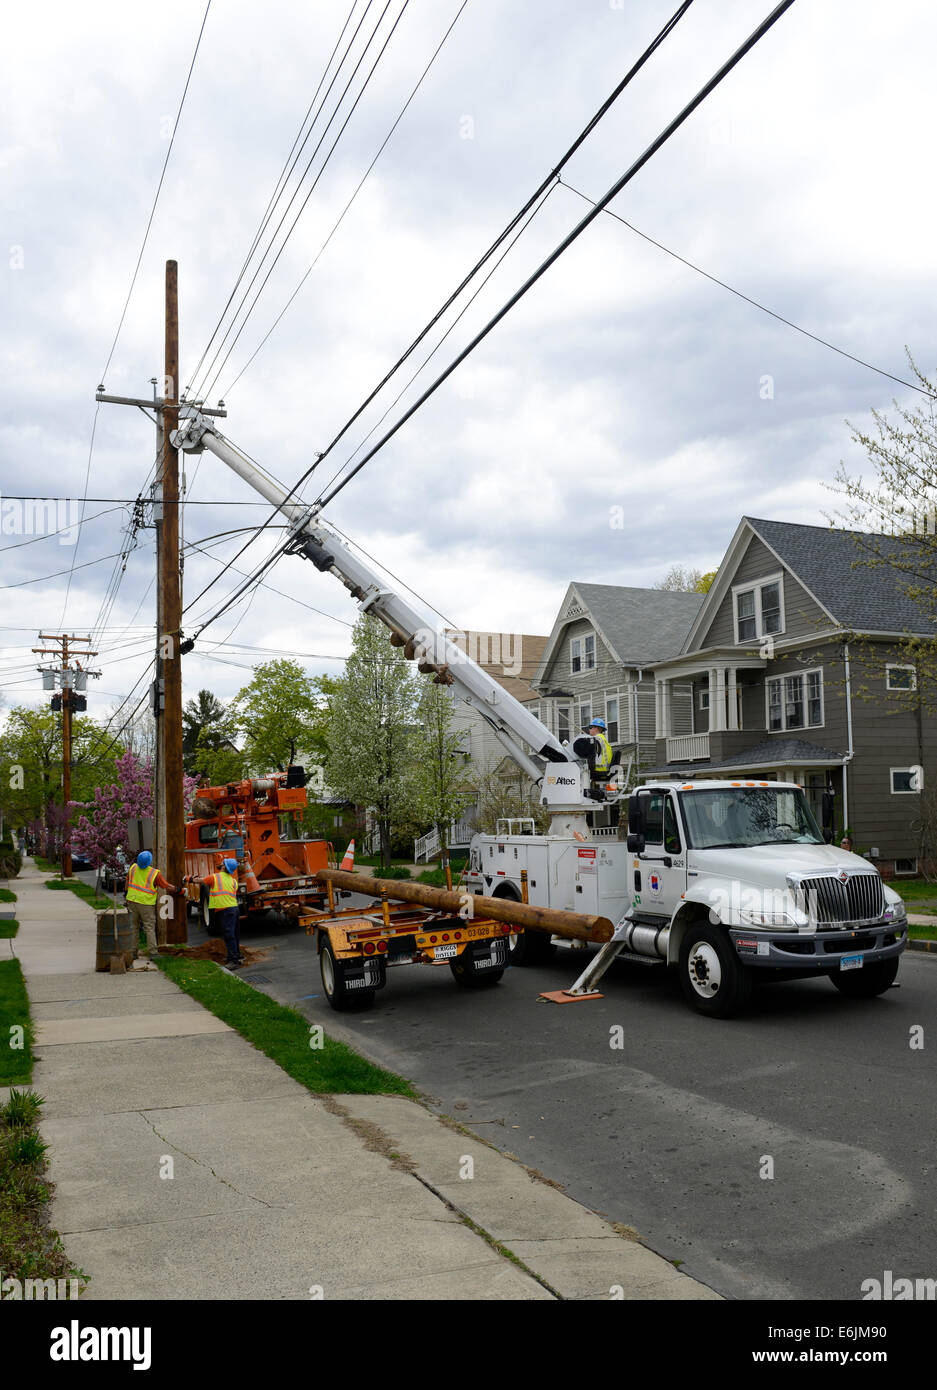 Altec Derrick Digger machine putting up new telephone poles in New Haven, CT. Stock Photo